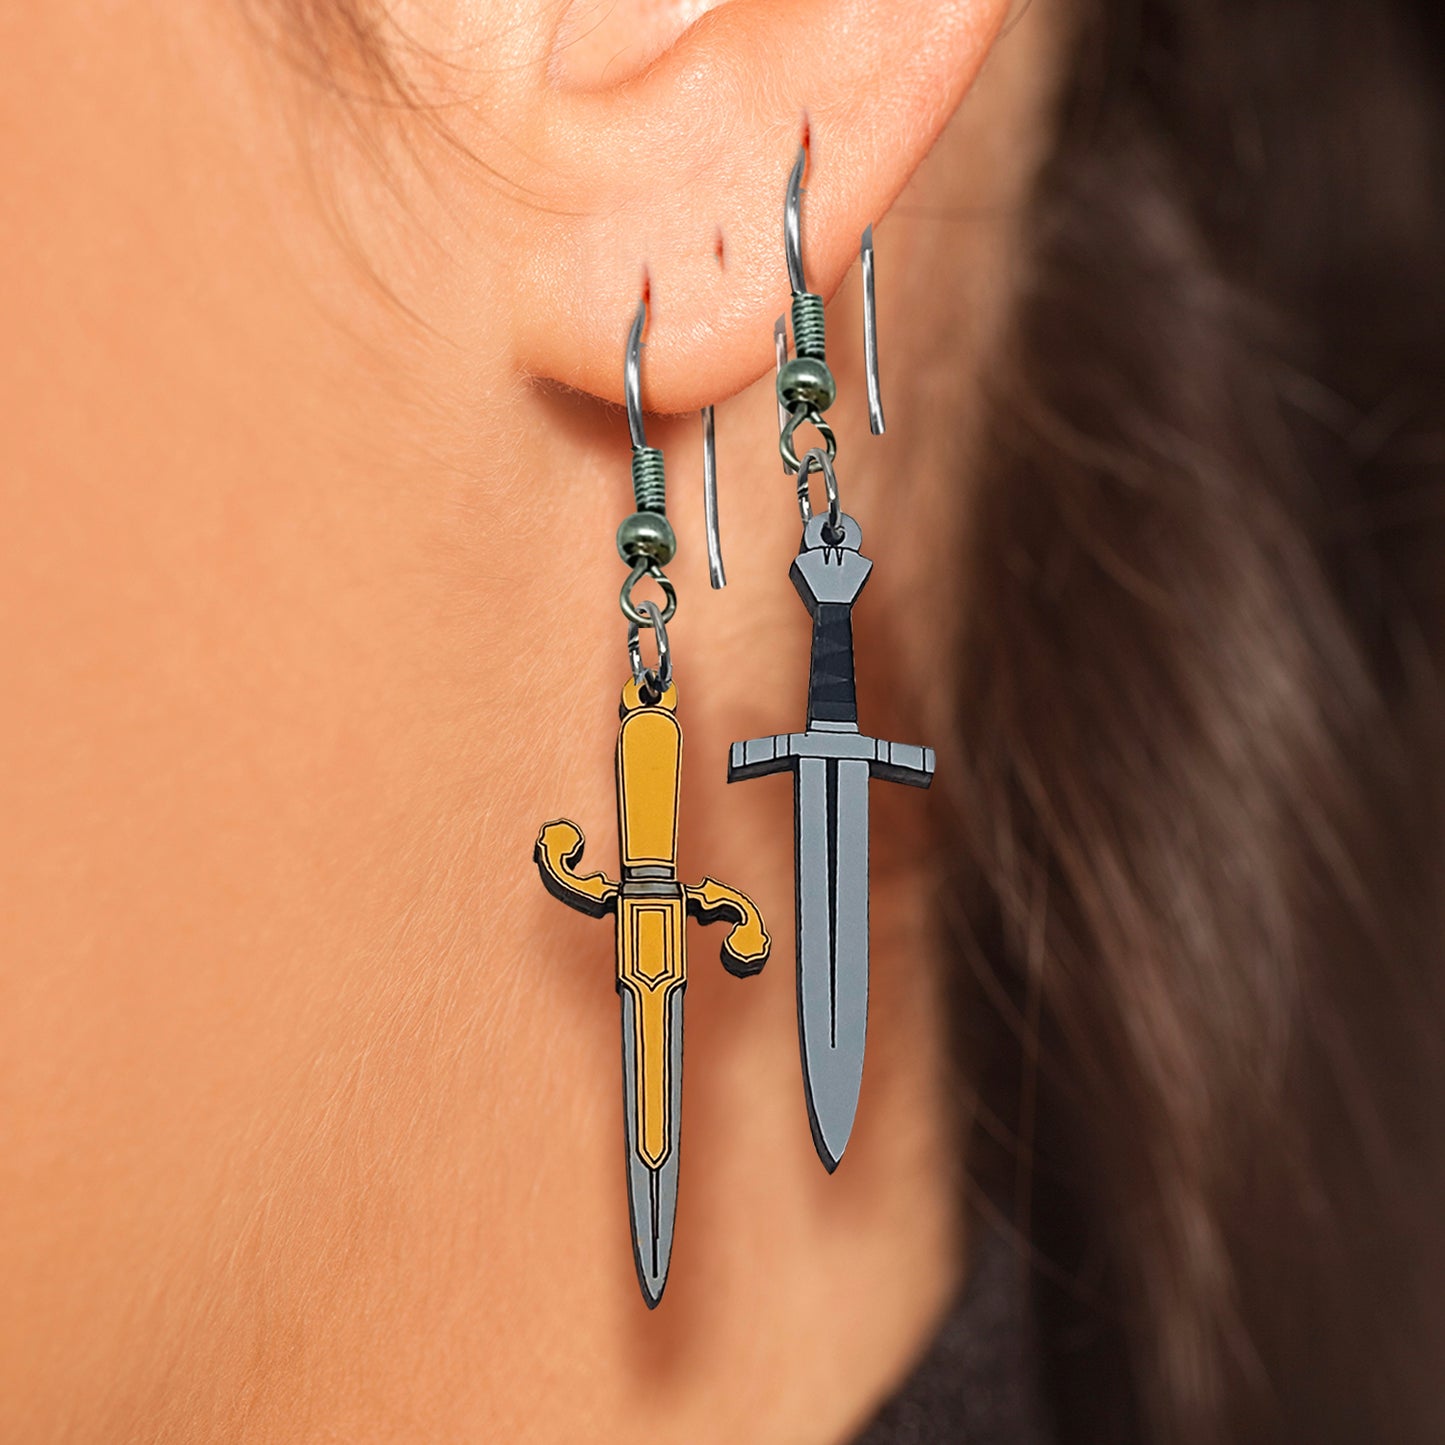 Close up view of a model's ear. Two dagger-shaped earrings hang from her earlobe. One dagger is gold with an asymmetrical hilt. The other is black and grey with a straight hilt.